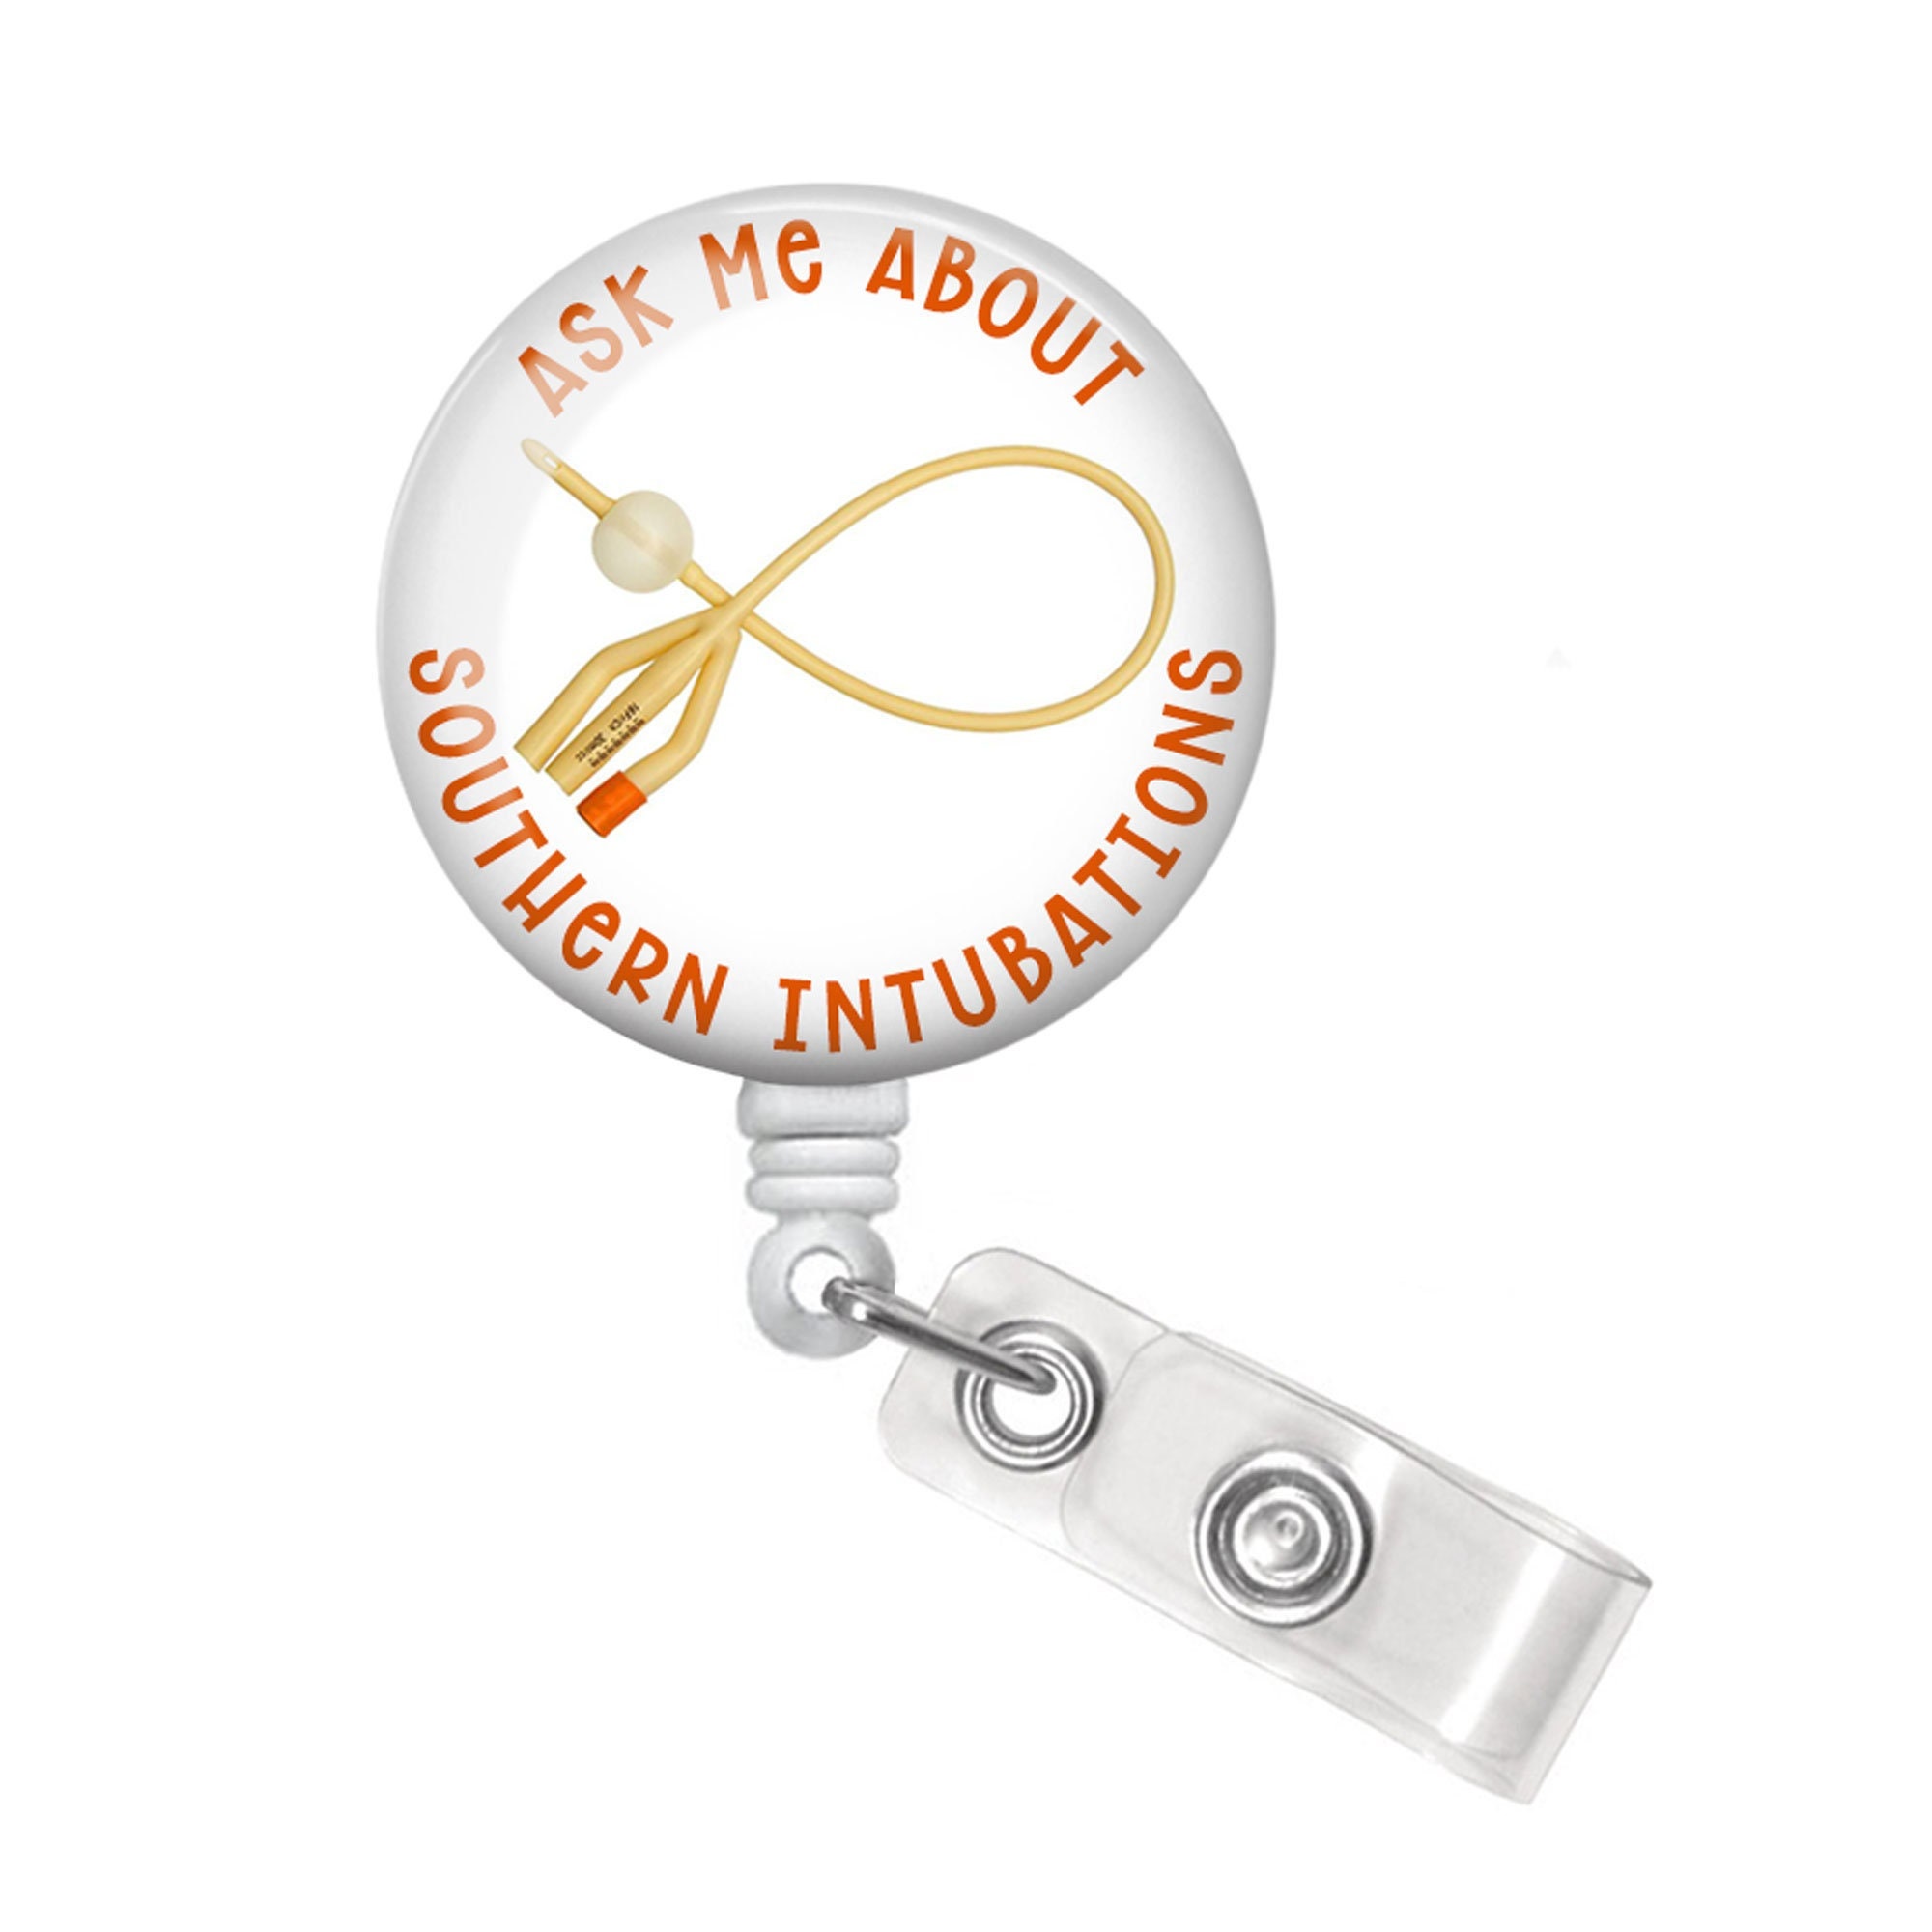 Ask Me About Southern Intubations Badge Reel - Nurse Badge Reel - PACU  Nurse Badge Reel - Urology Badge Reel - ICU Nurse Badge Holder